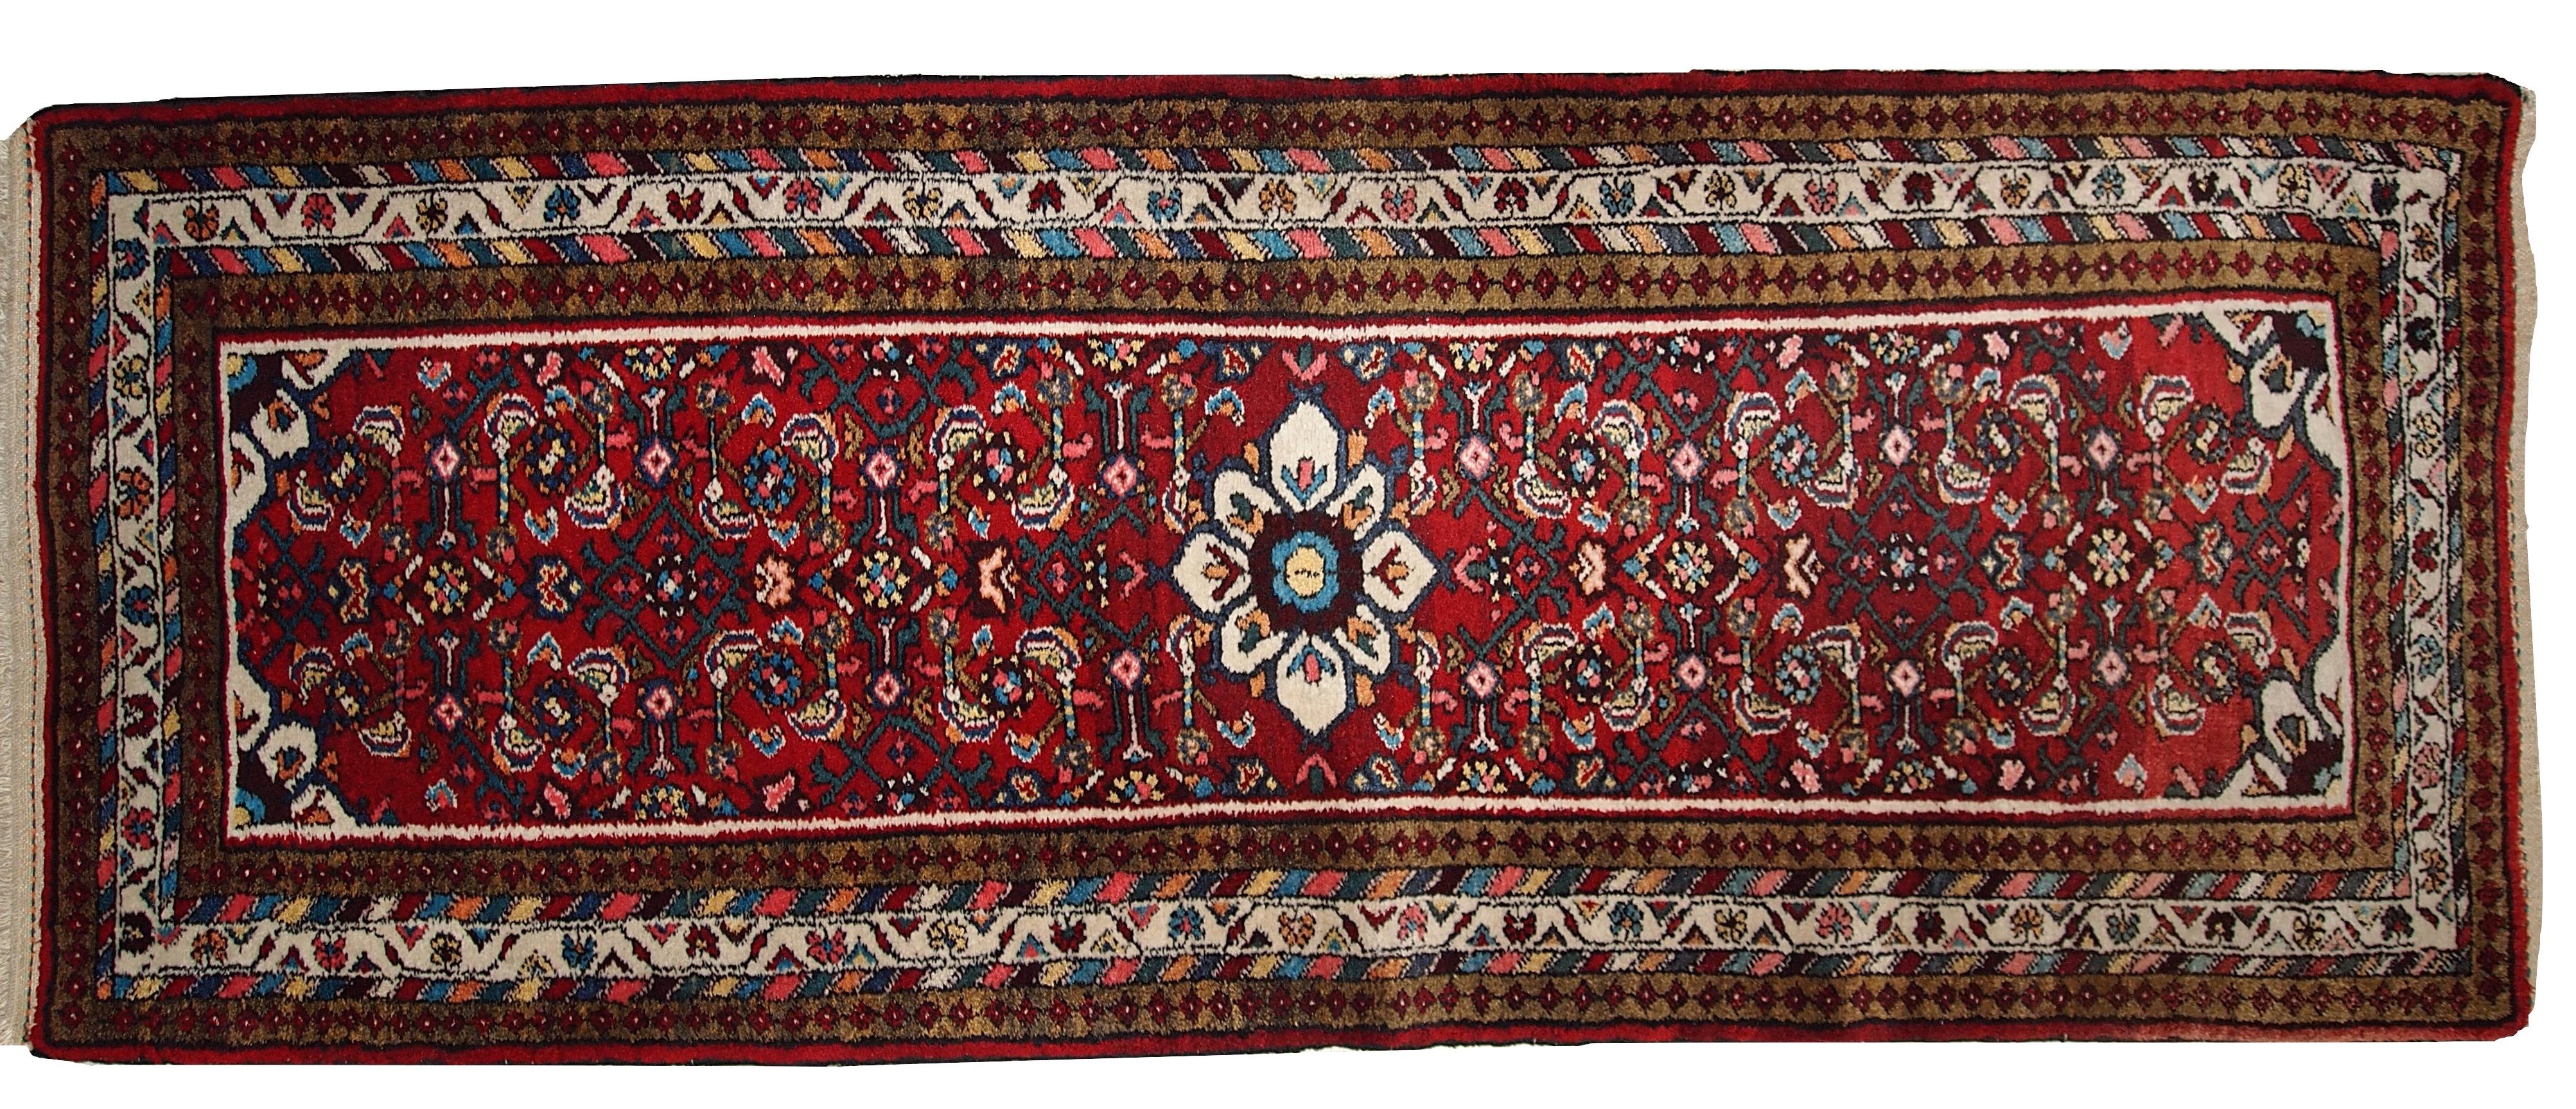 Vintage Persian Hamadan runner in original good condition and in red shade. The rug is thick with the full pile of soft wool.

 